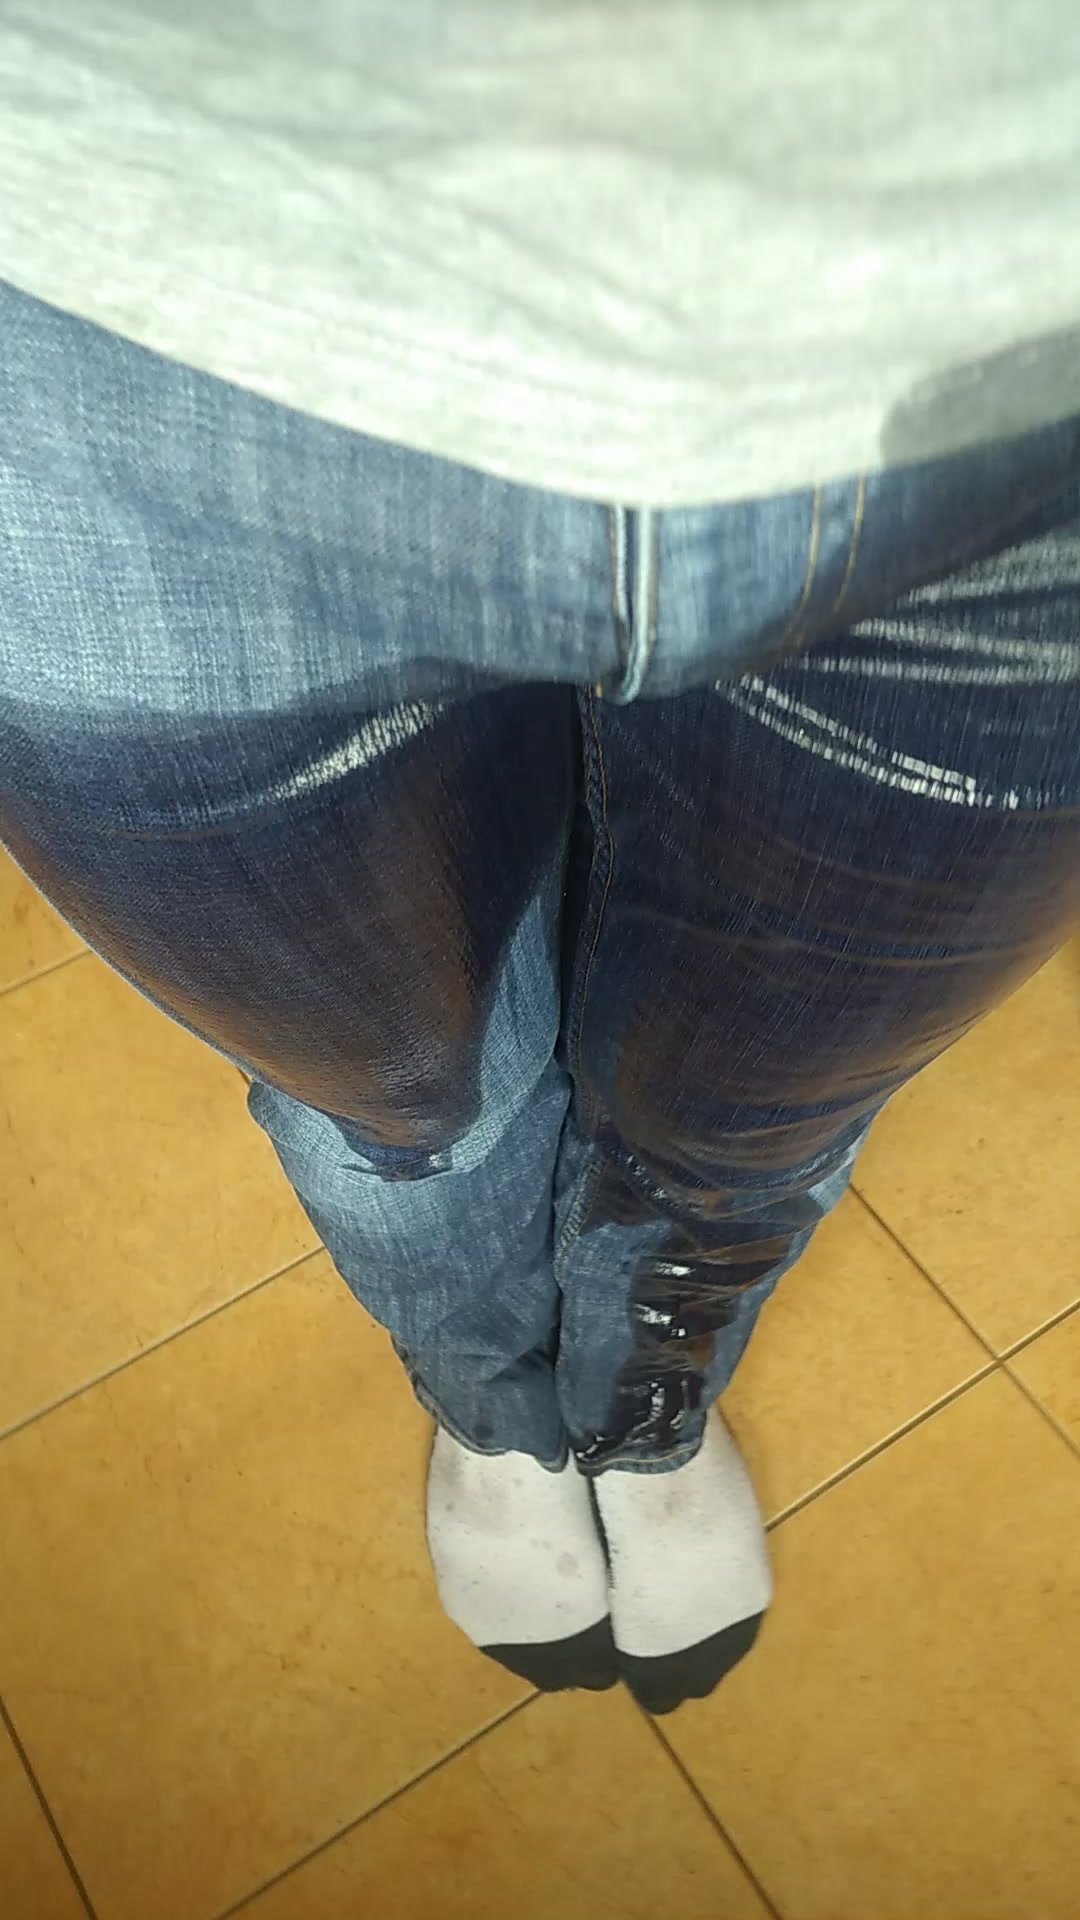 Wetting my jeans and socks in kitchen